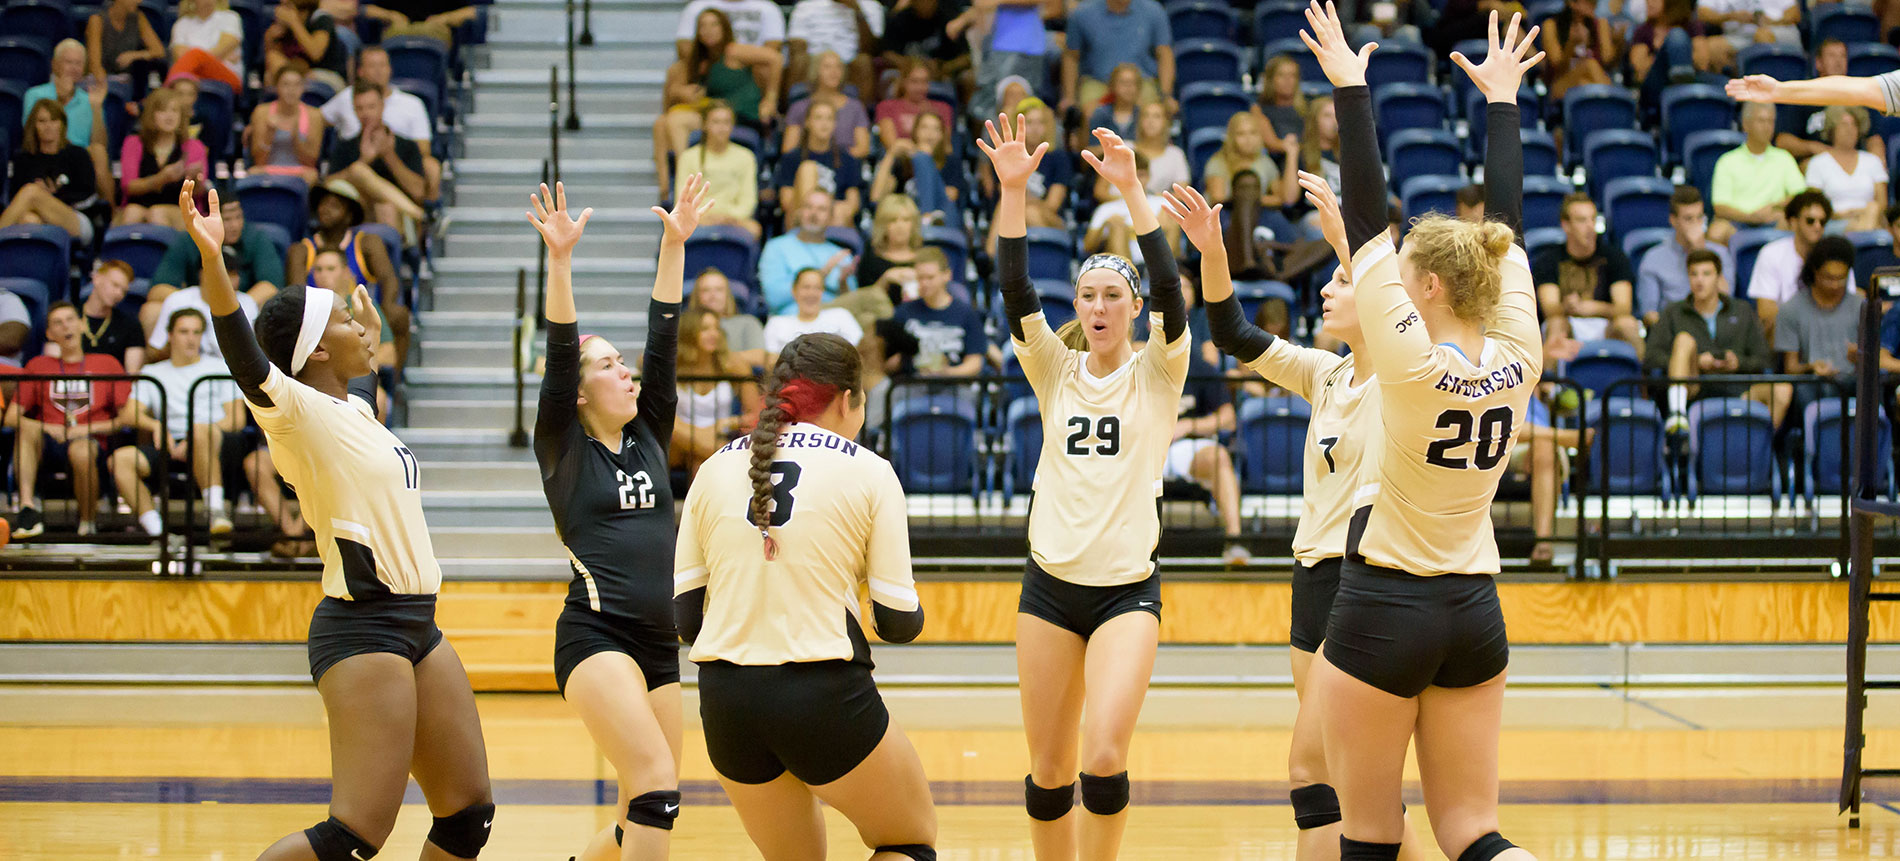 Trojans Outlast Royals in Four Sets